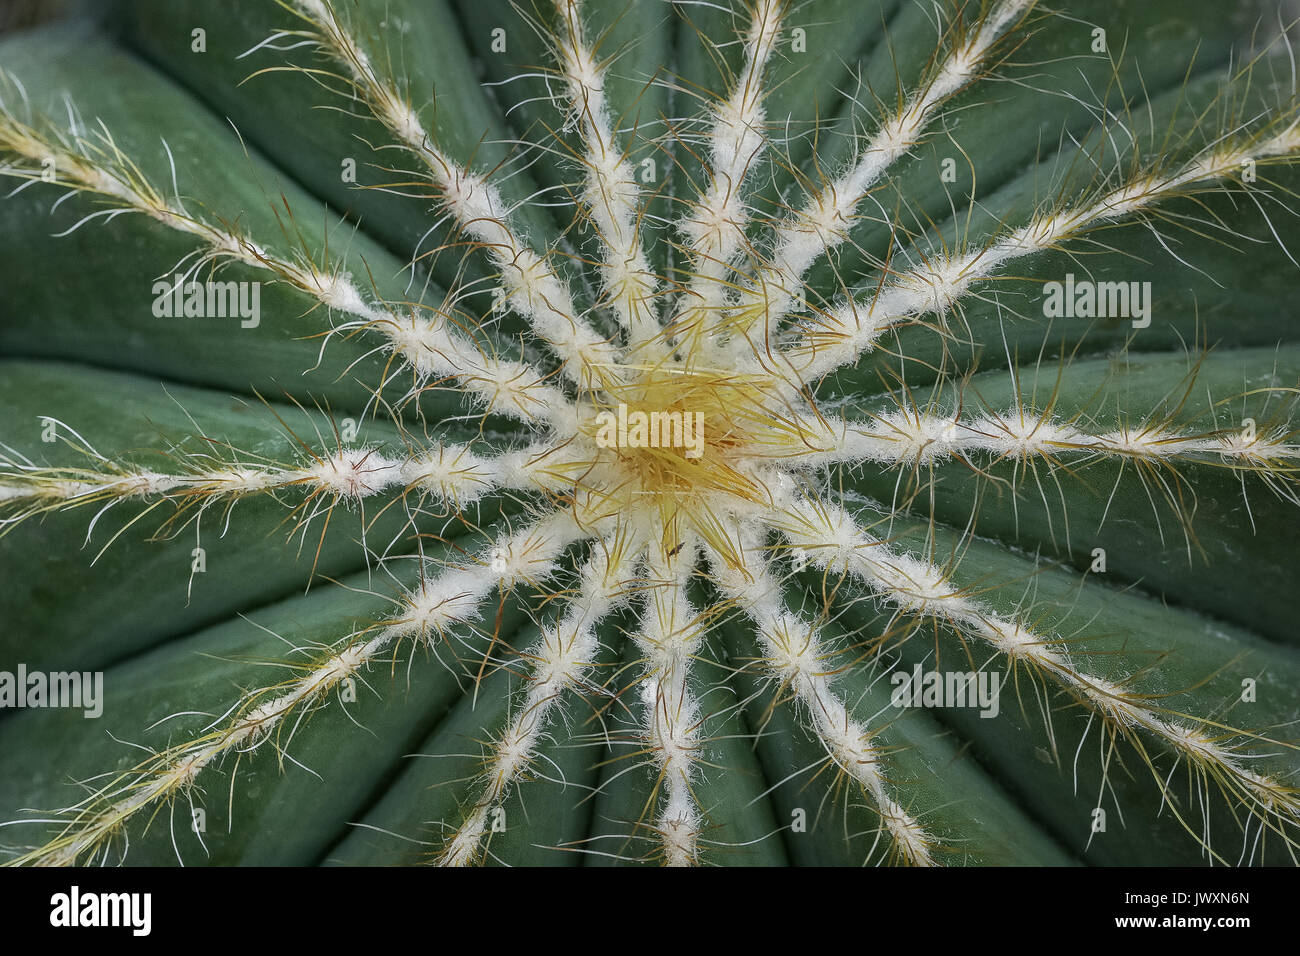 Macro photography of a cactus  plant showing its symmetry Stock Photo